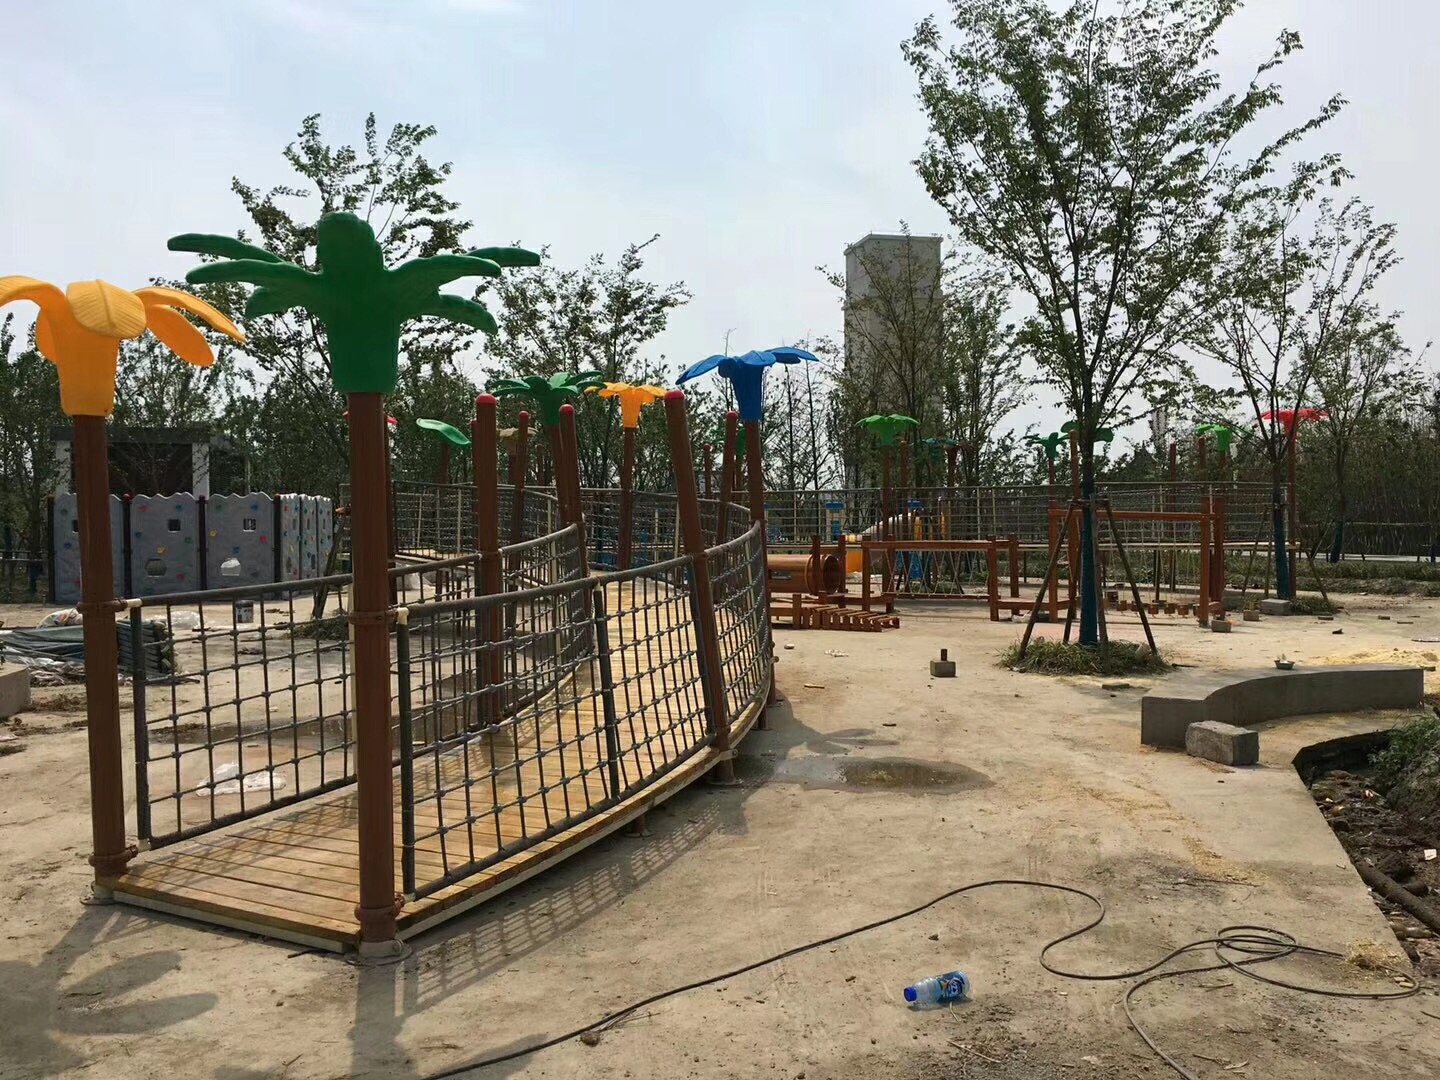 Our new installation outdoor playground project–located in Jiading district, Shanghai, China